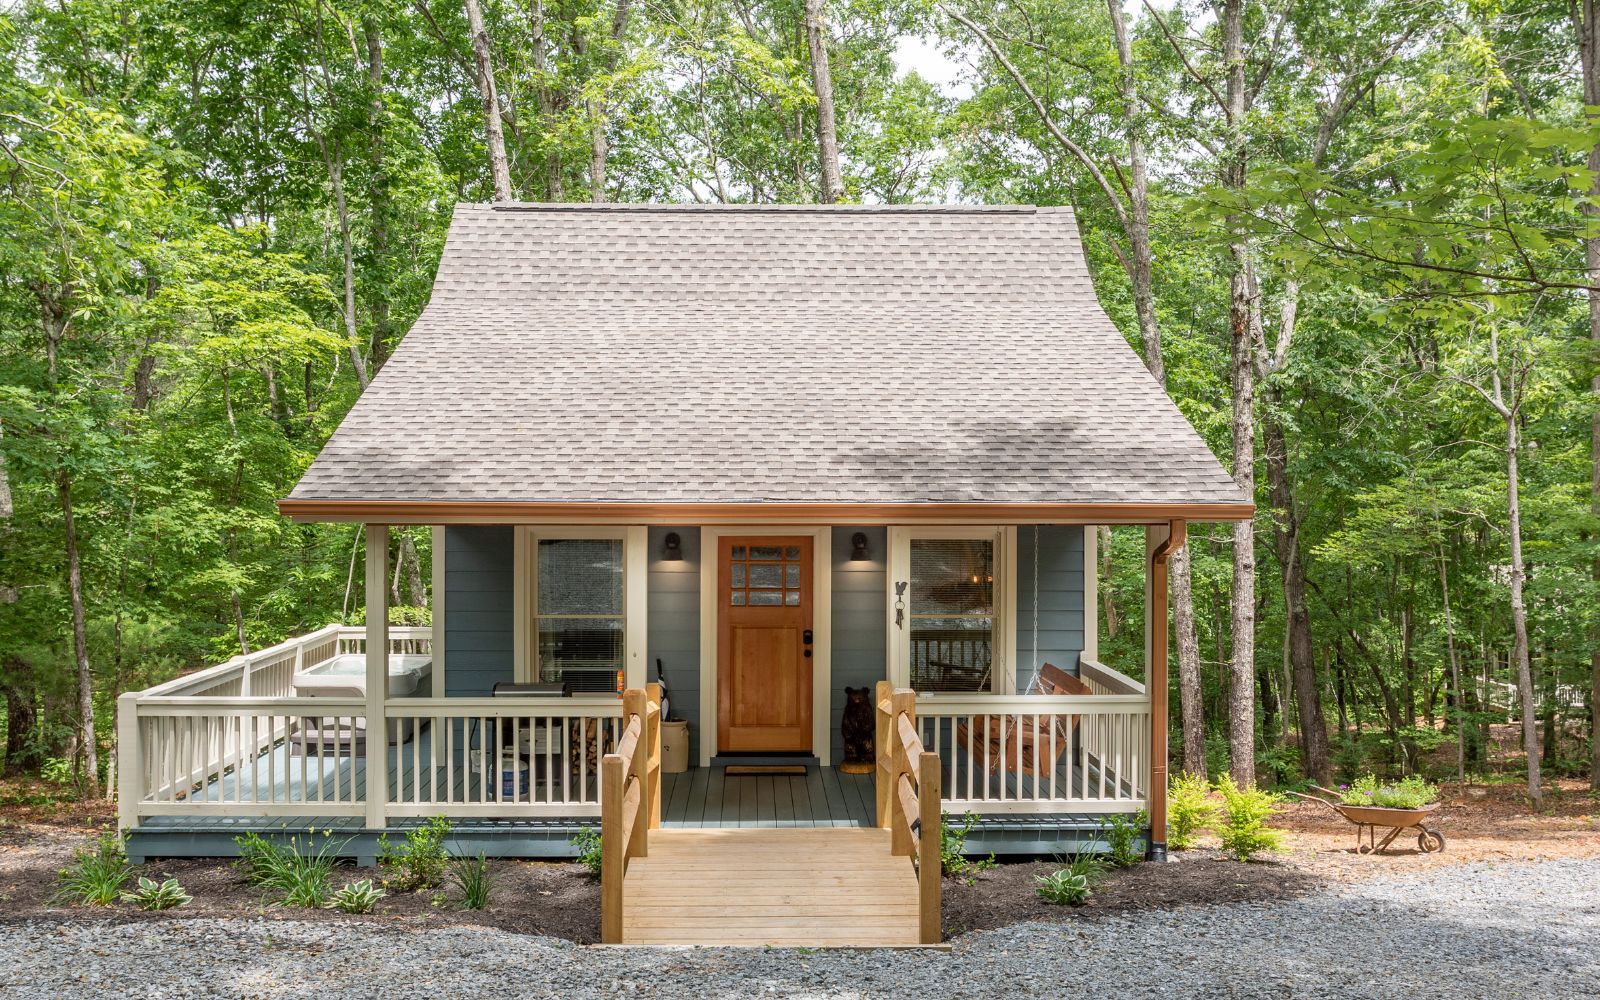 These Creative Tiny Homes Will Make You Want to Downsize ASAP